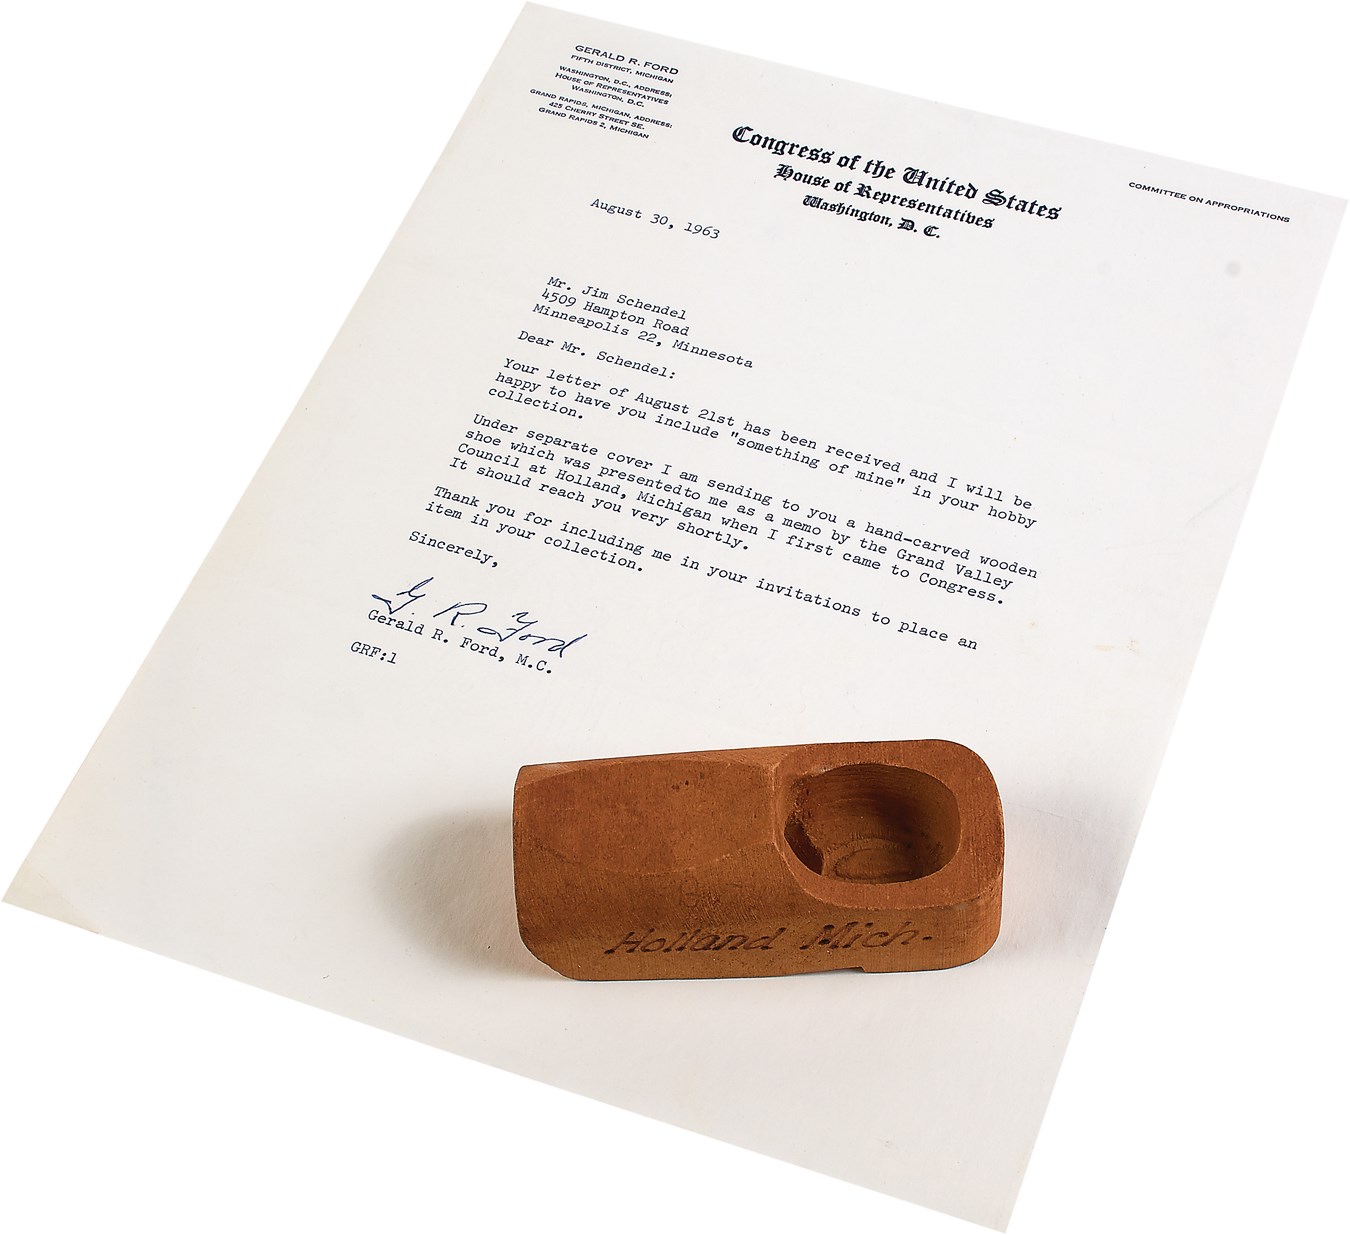 - Gerald Ford Personally Owned Wooden Shoe and Signed Letter Gifted by Ford